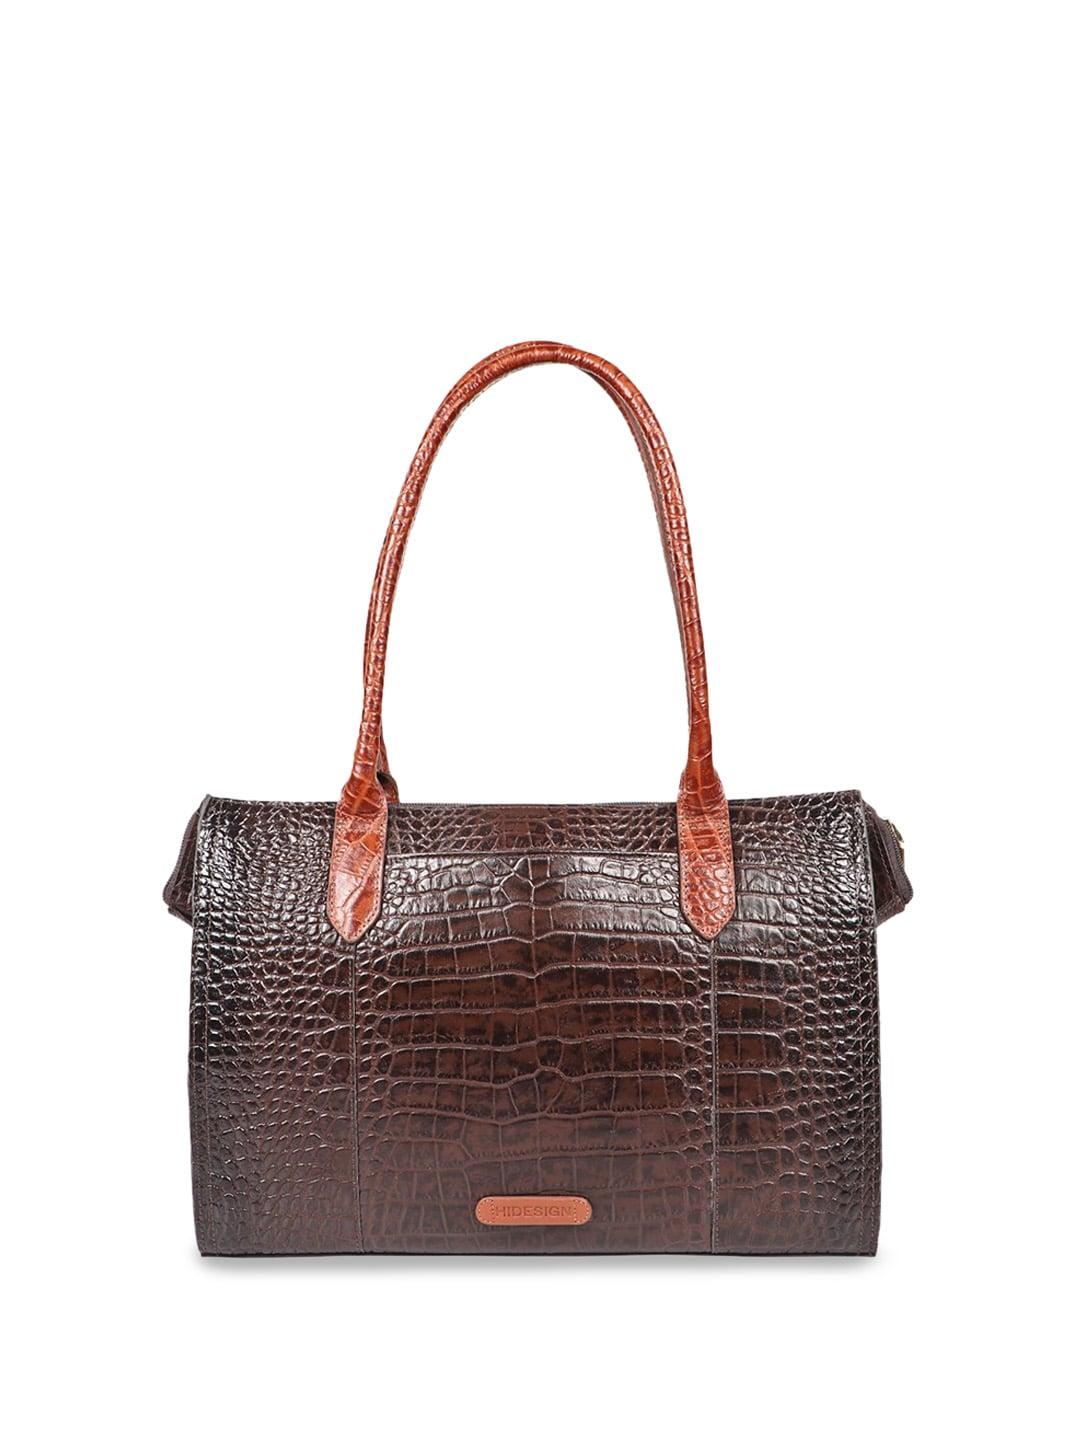 hidesign-brown-leather-up-to-16-inch-fashion